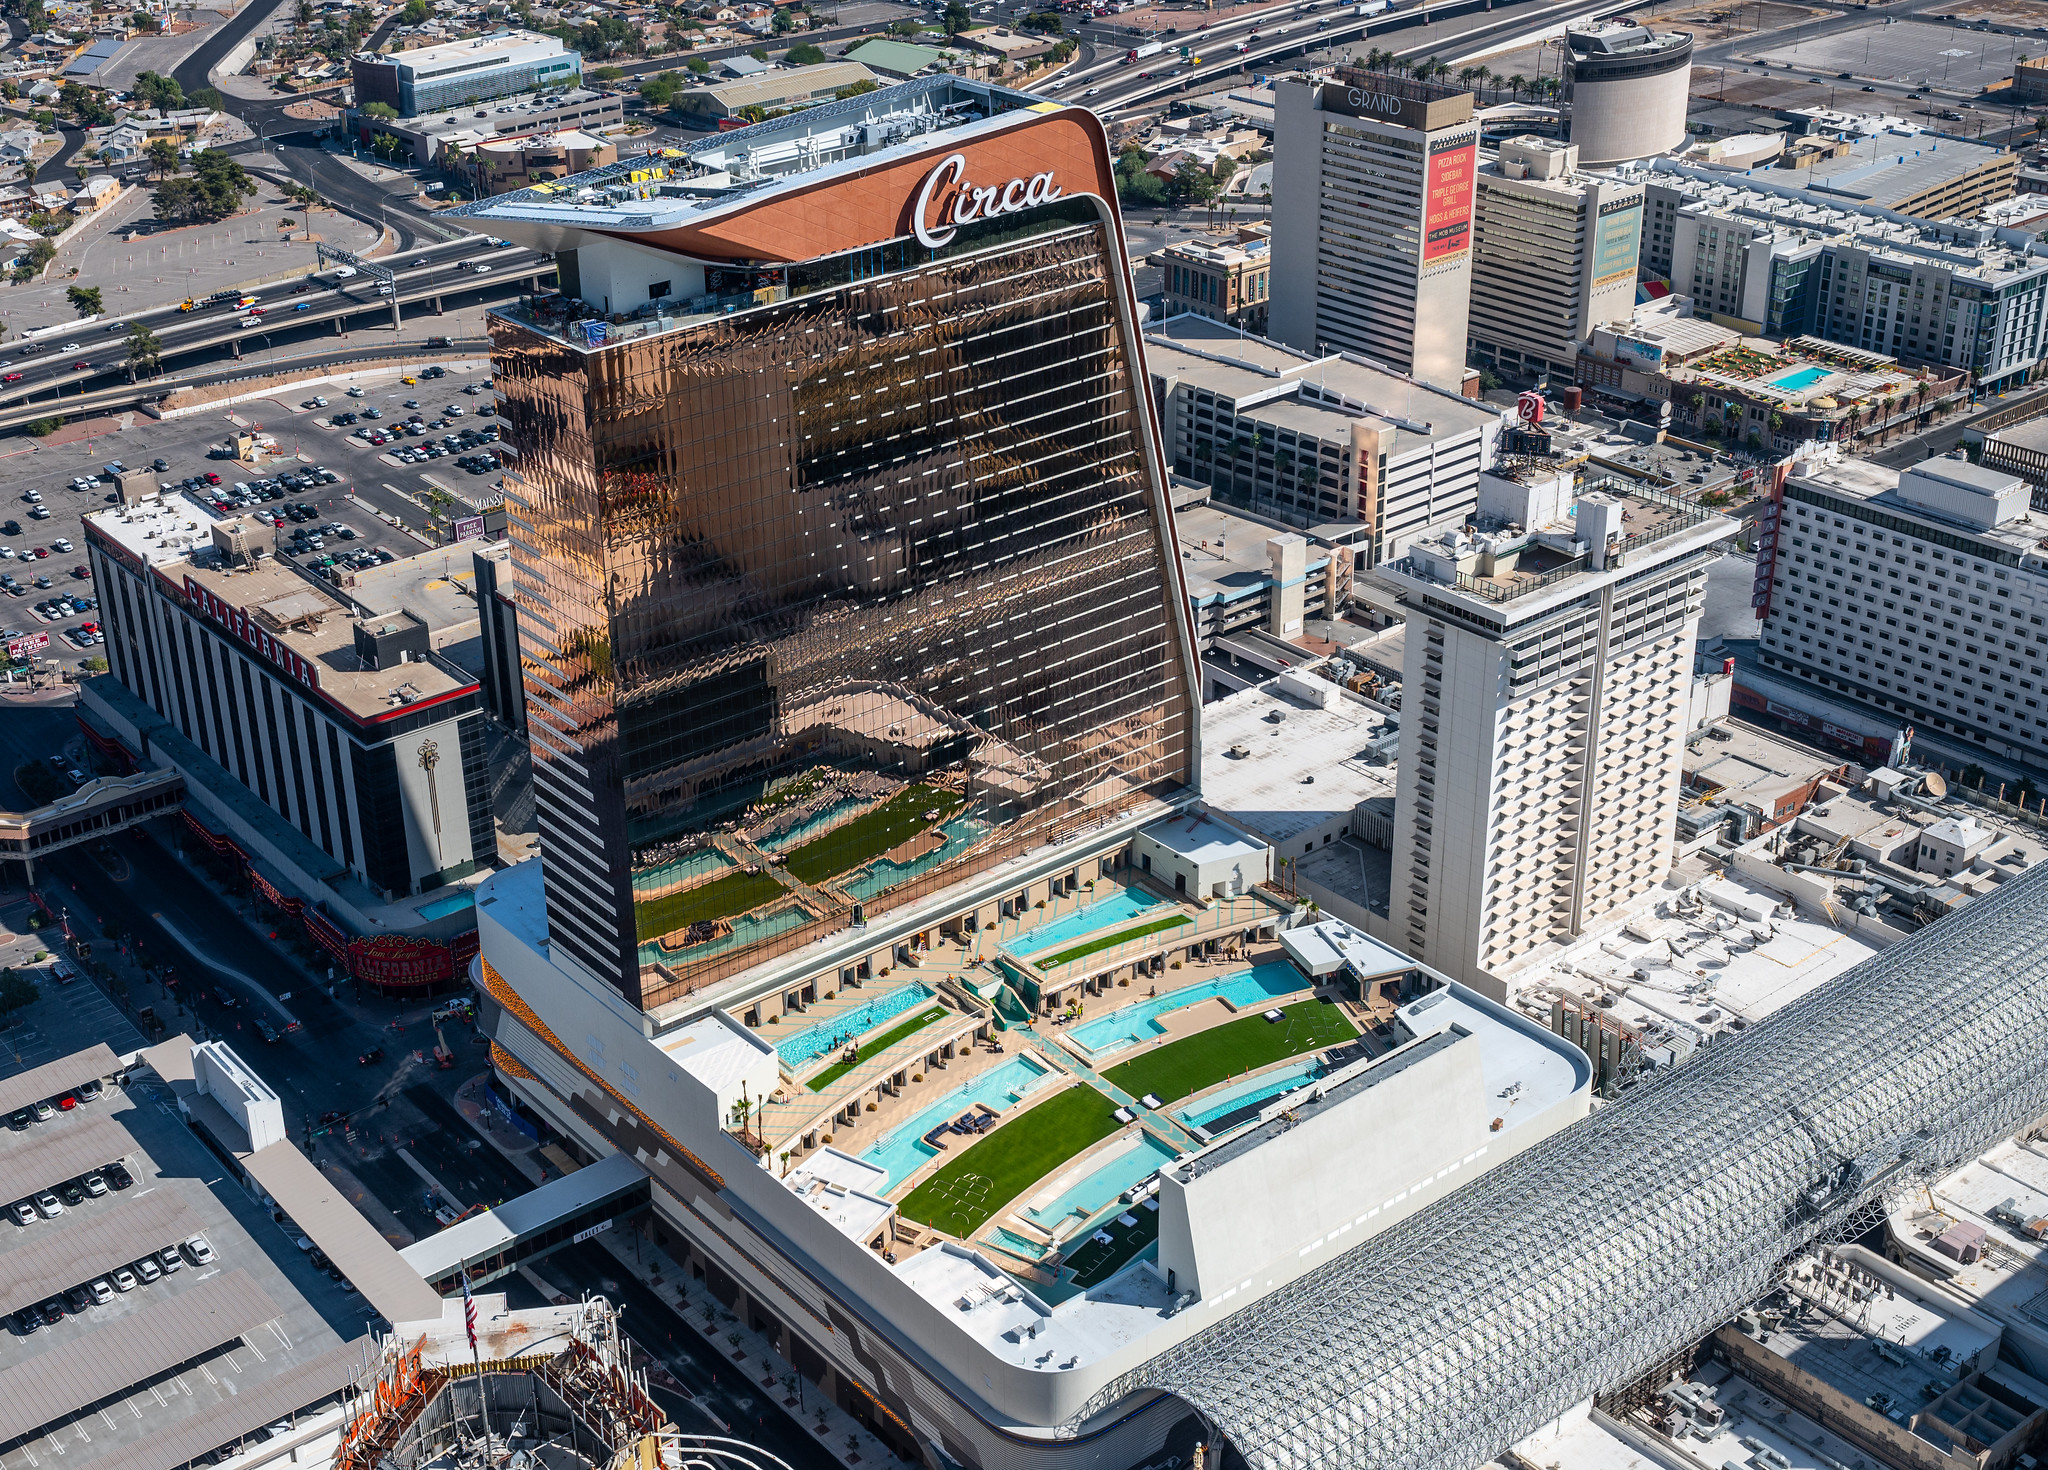 New Circa Resort & Casino Launches in Downtown Las Vegas with